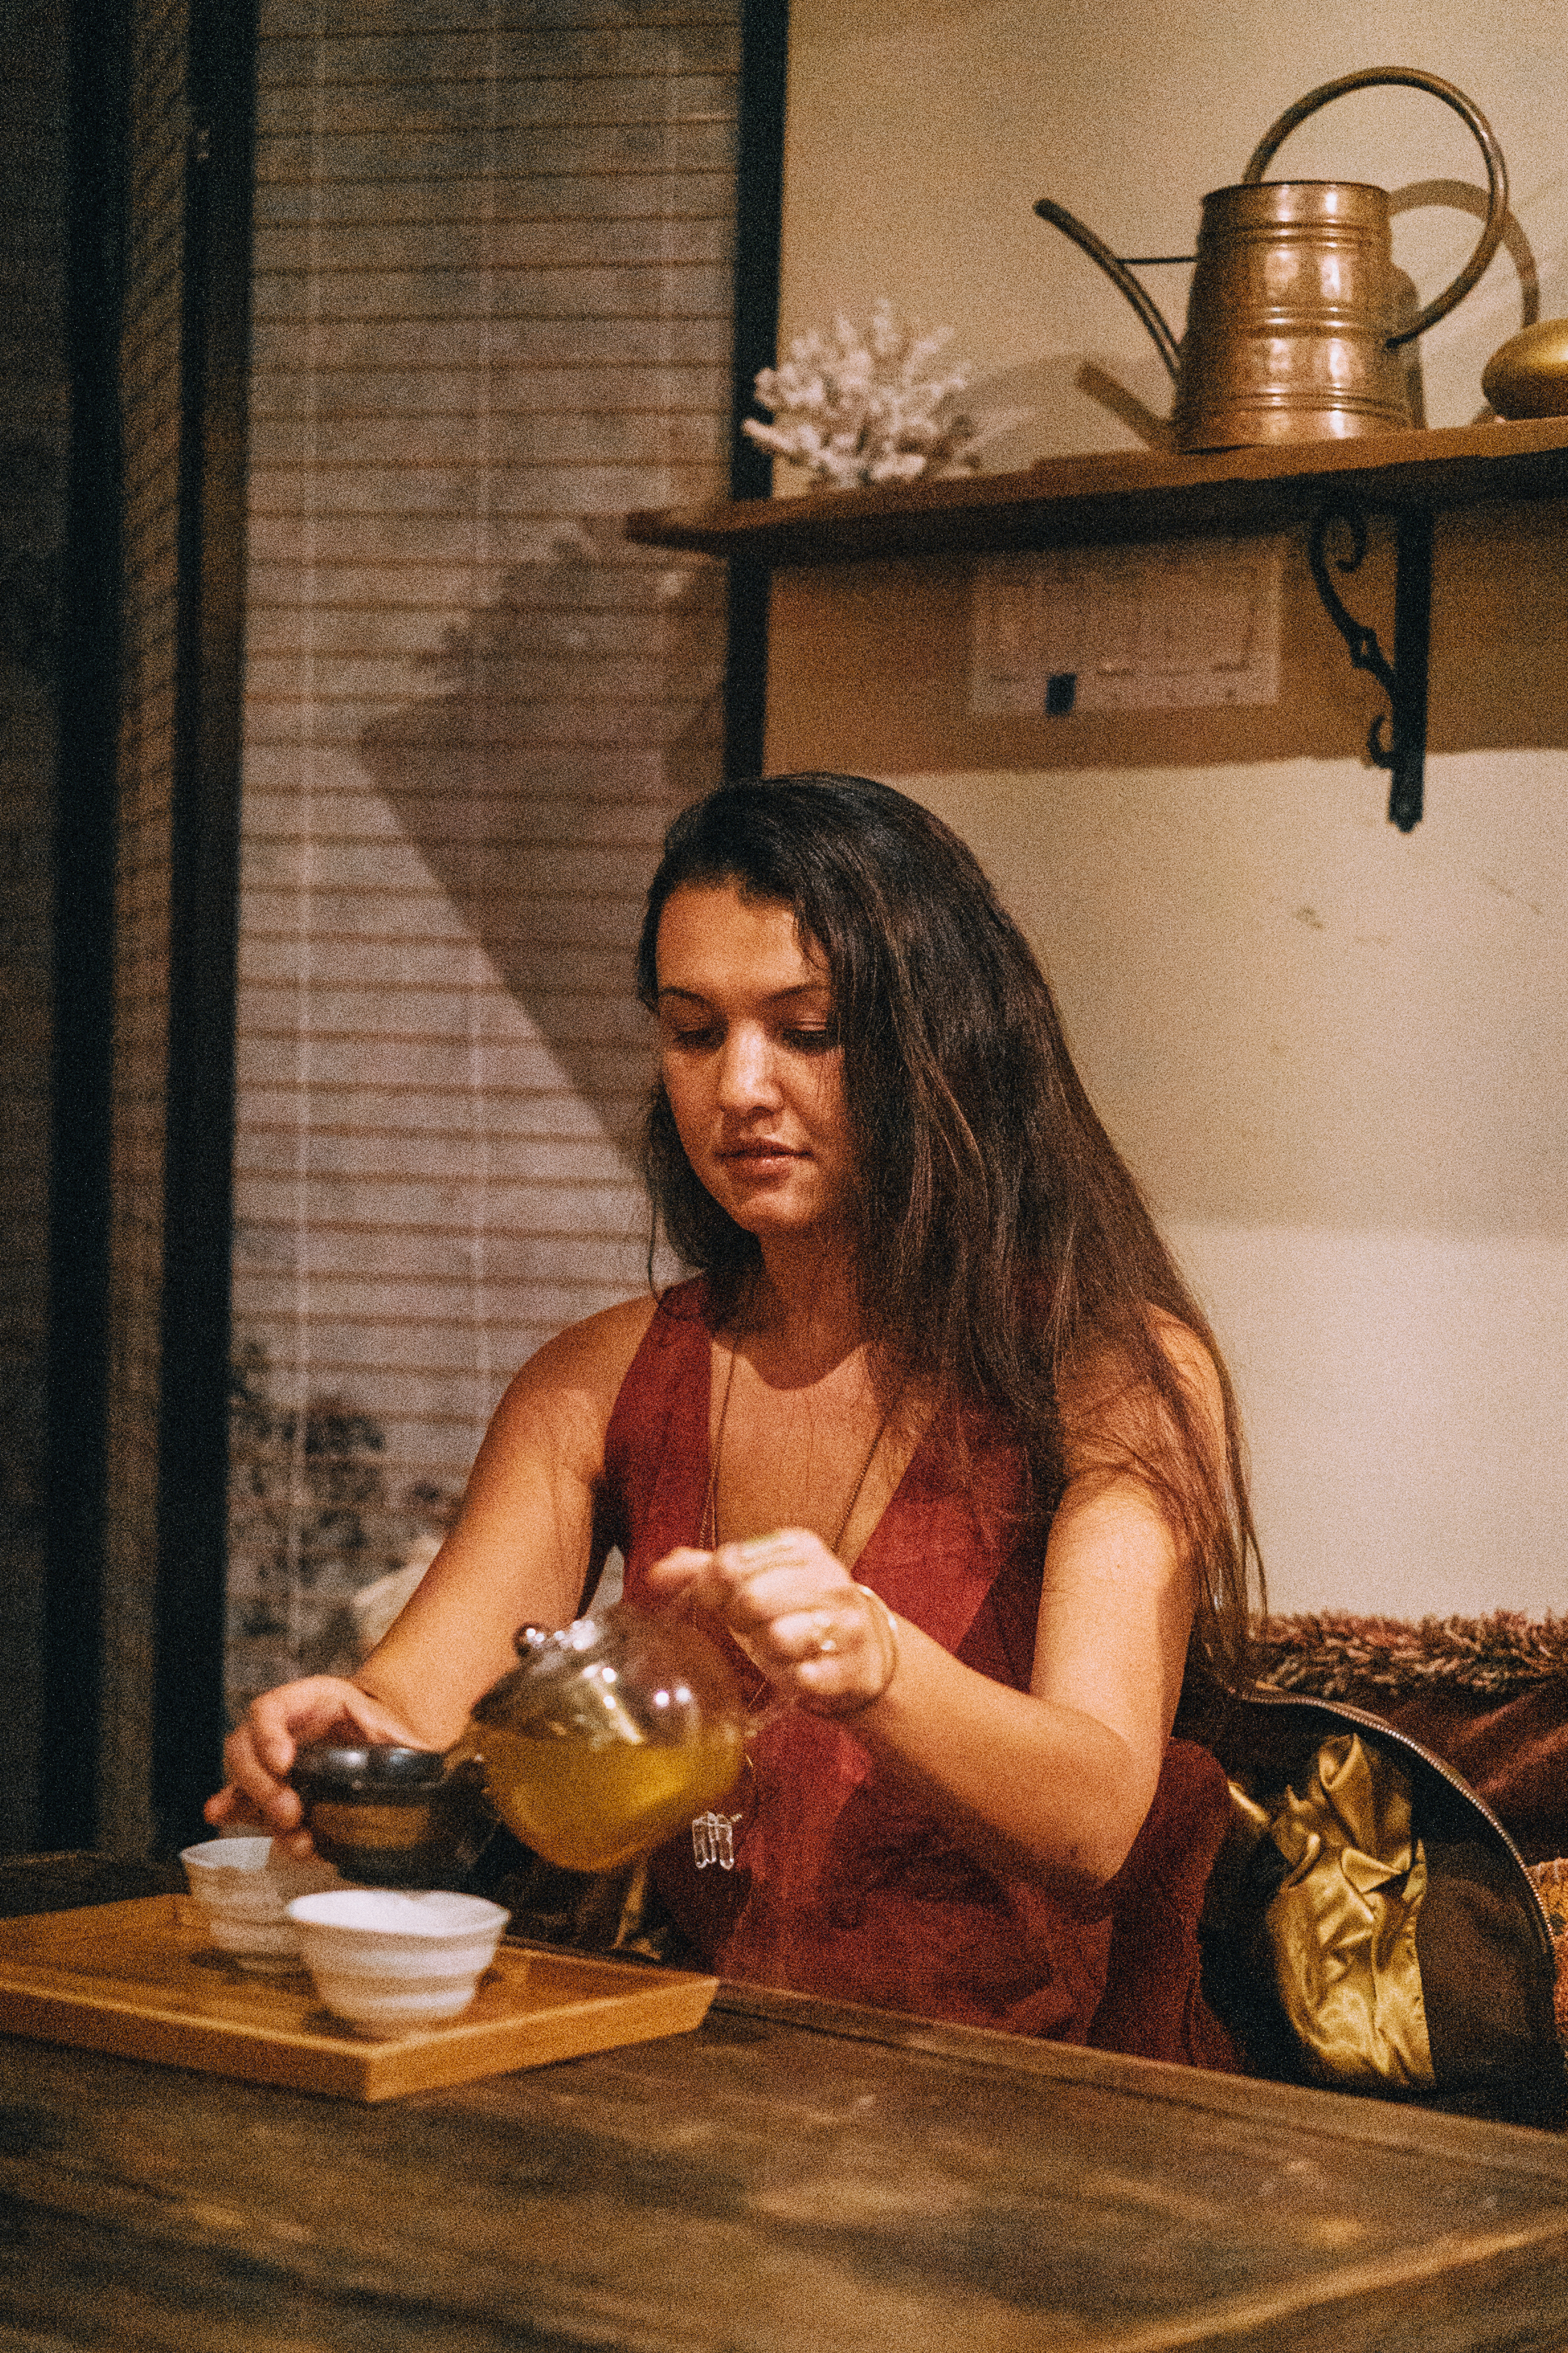 A woman in a red dress pours tea from a glass teapot into white cups on a wooden tray. She is seated at a rustic wooden table in a cozy, dimly lit room.